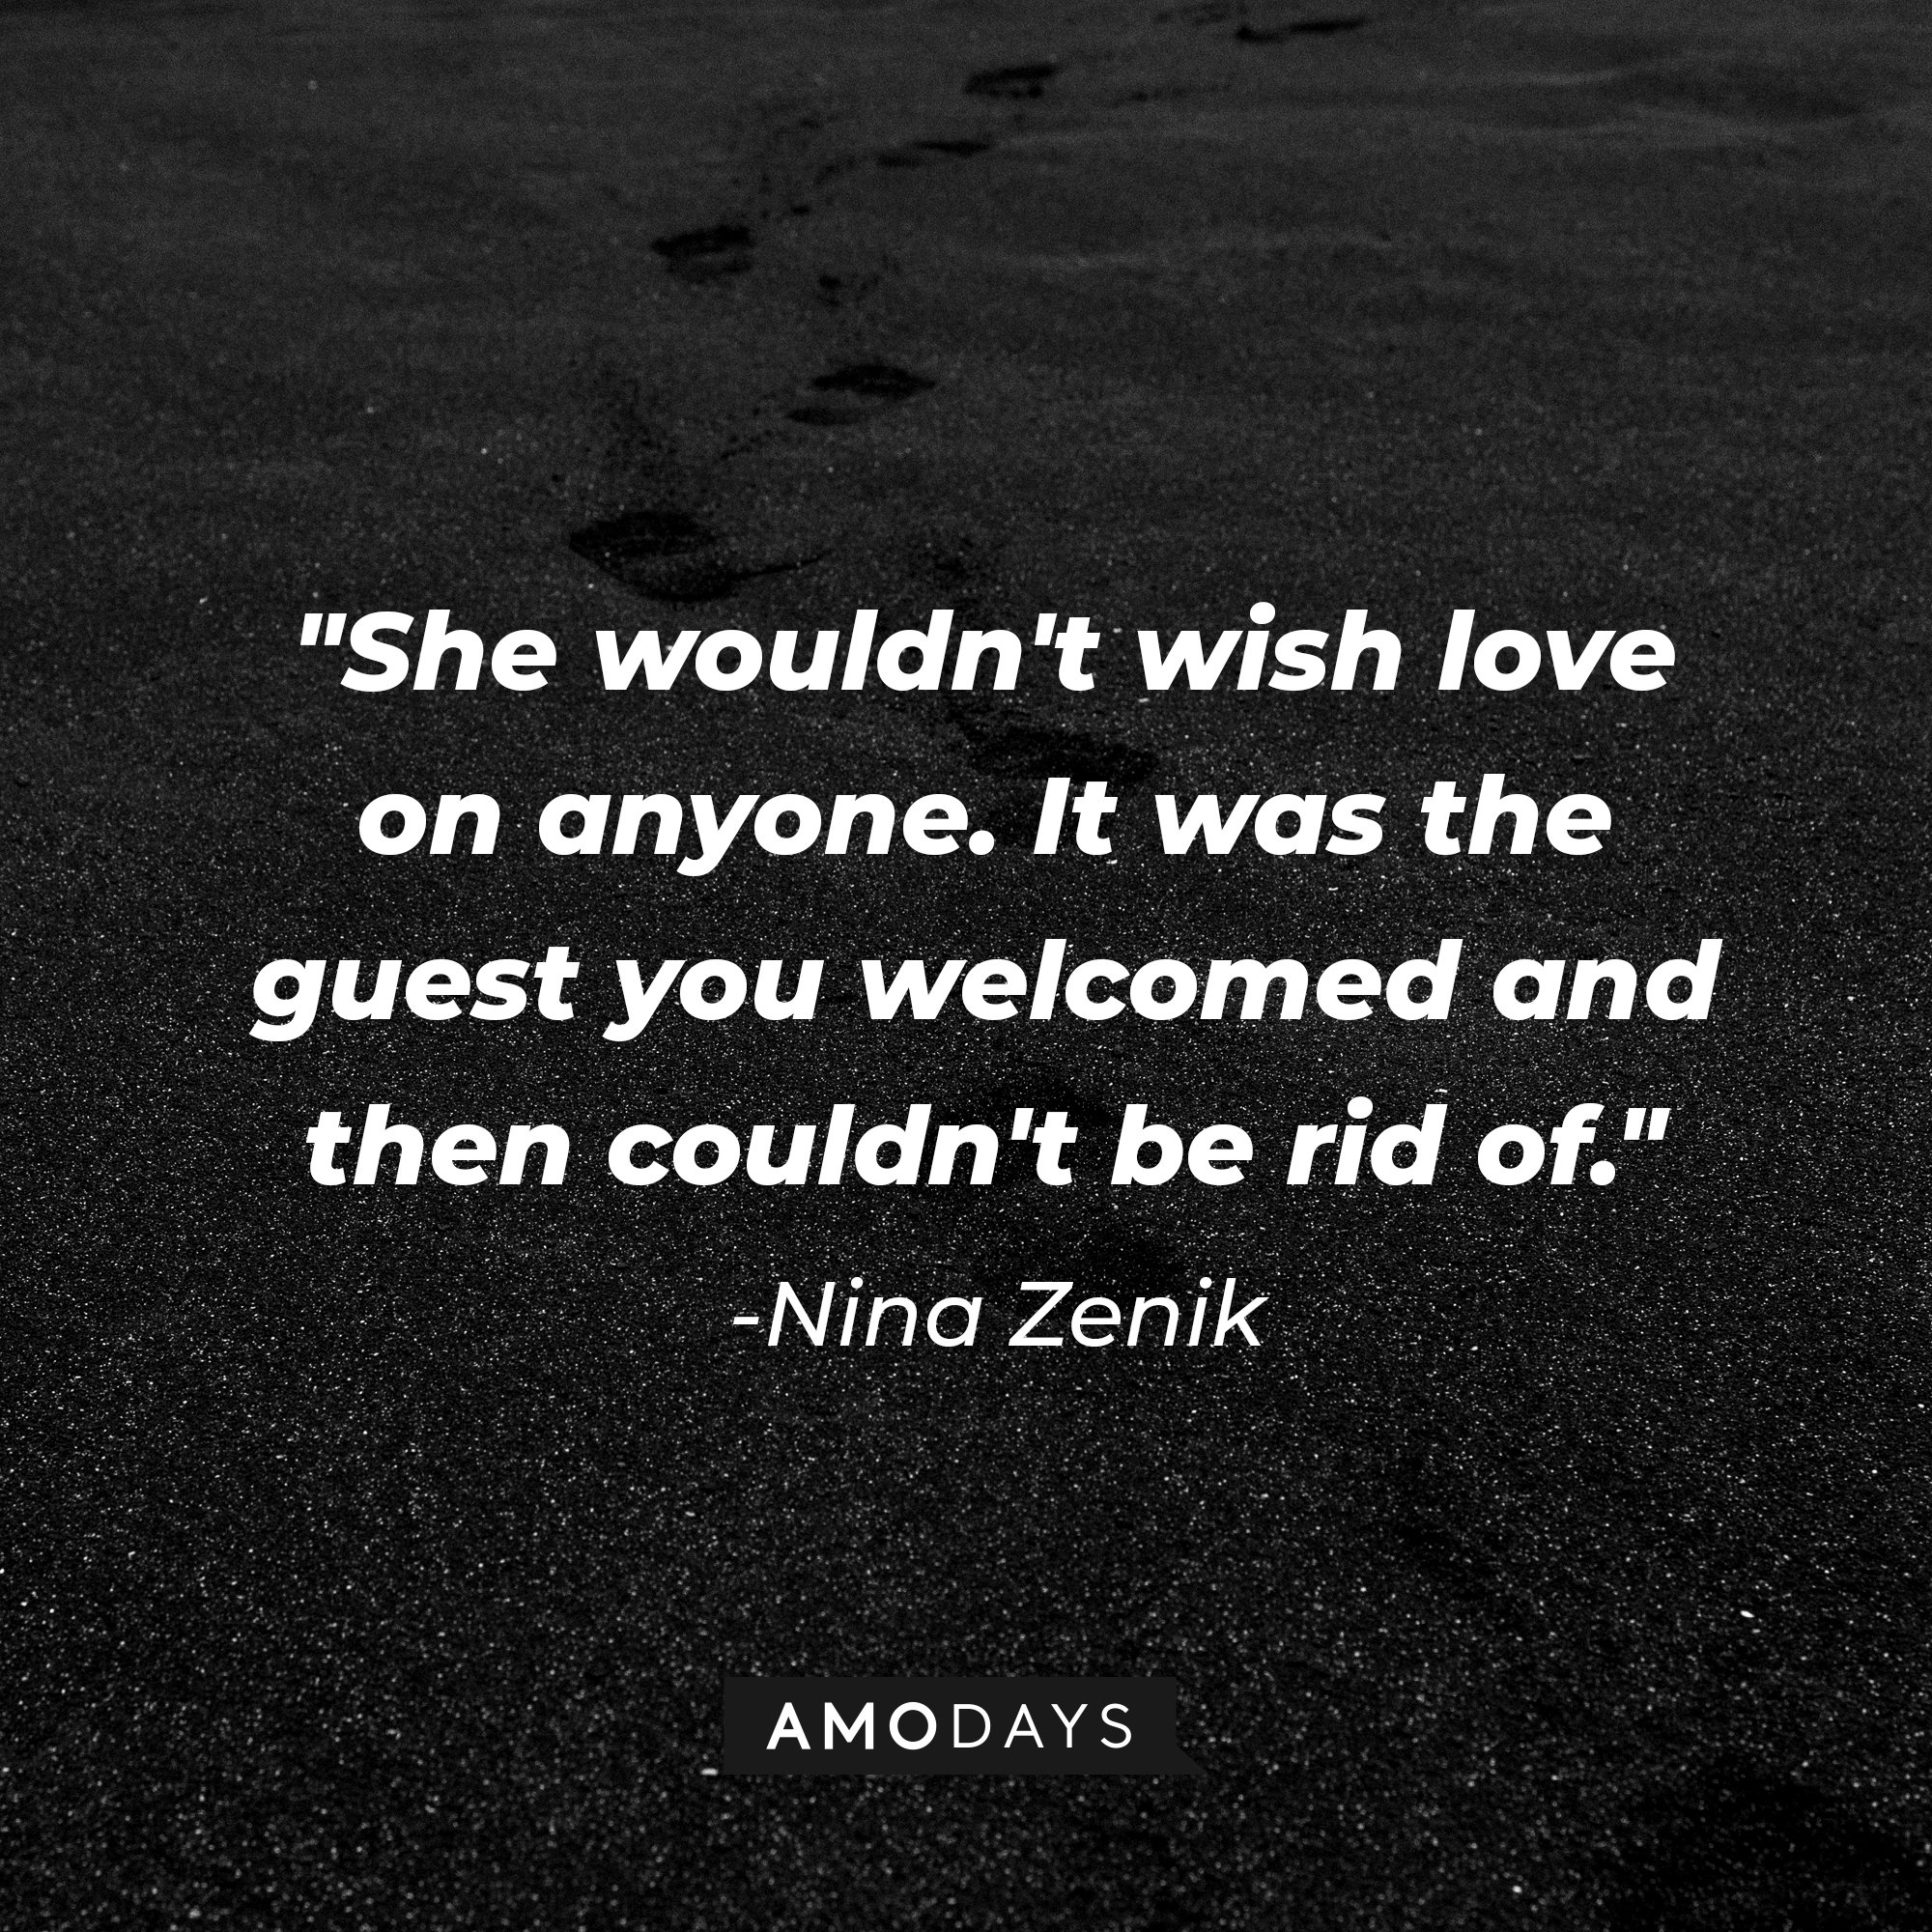 Nina Zenik’s quote: "She wouldn't wish love on anyone. It was the guest you welcomed and then couldn't be rid of." | Image: AmoDays